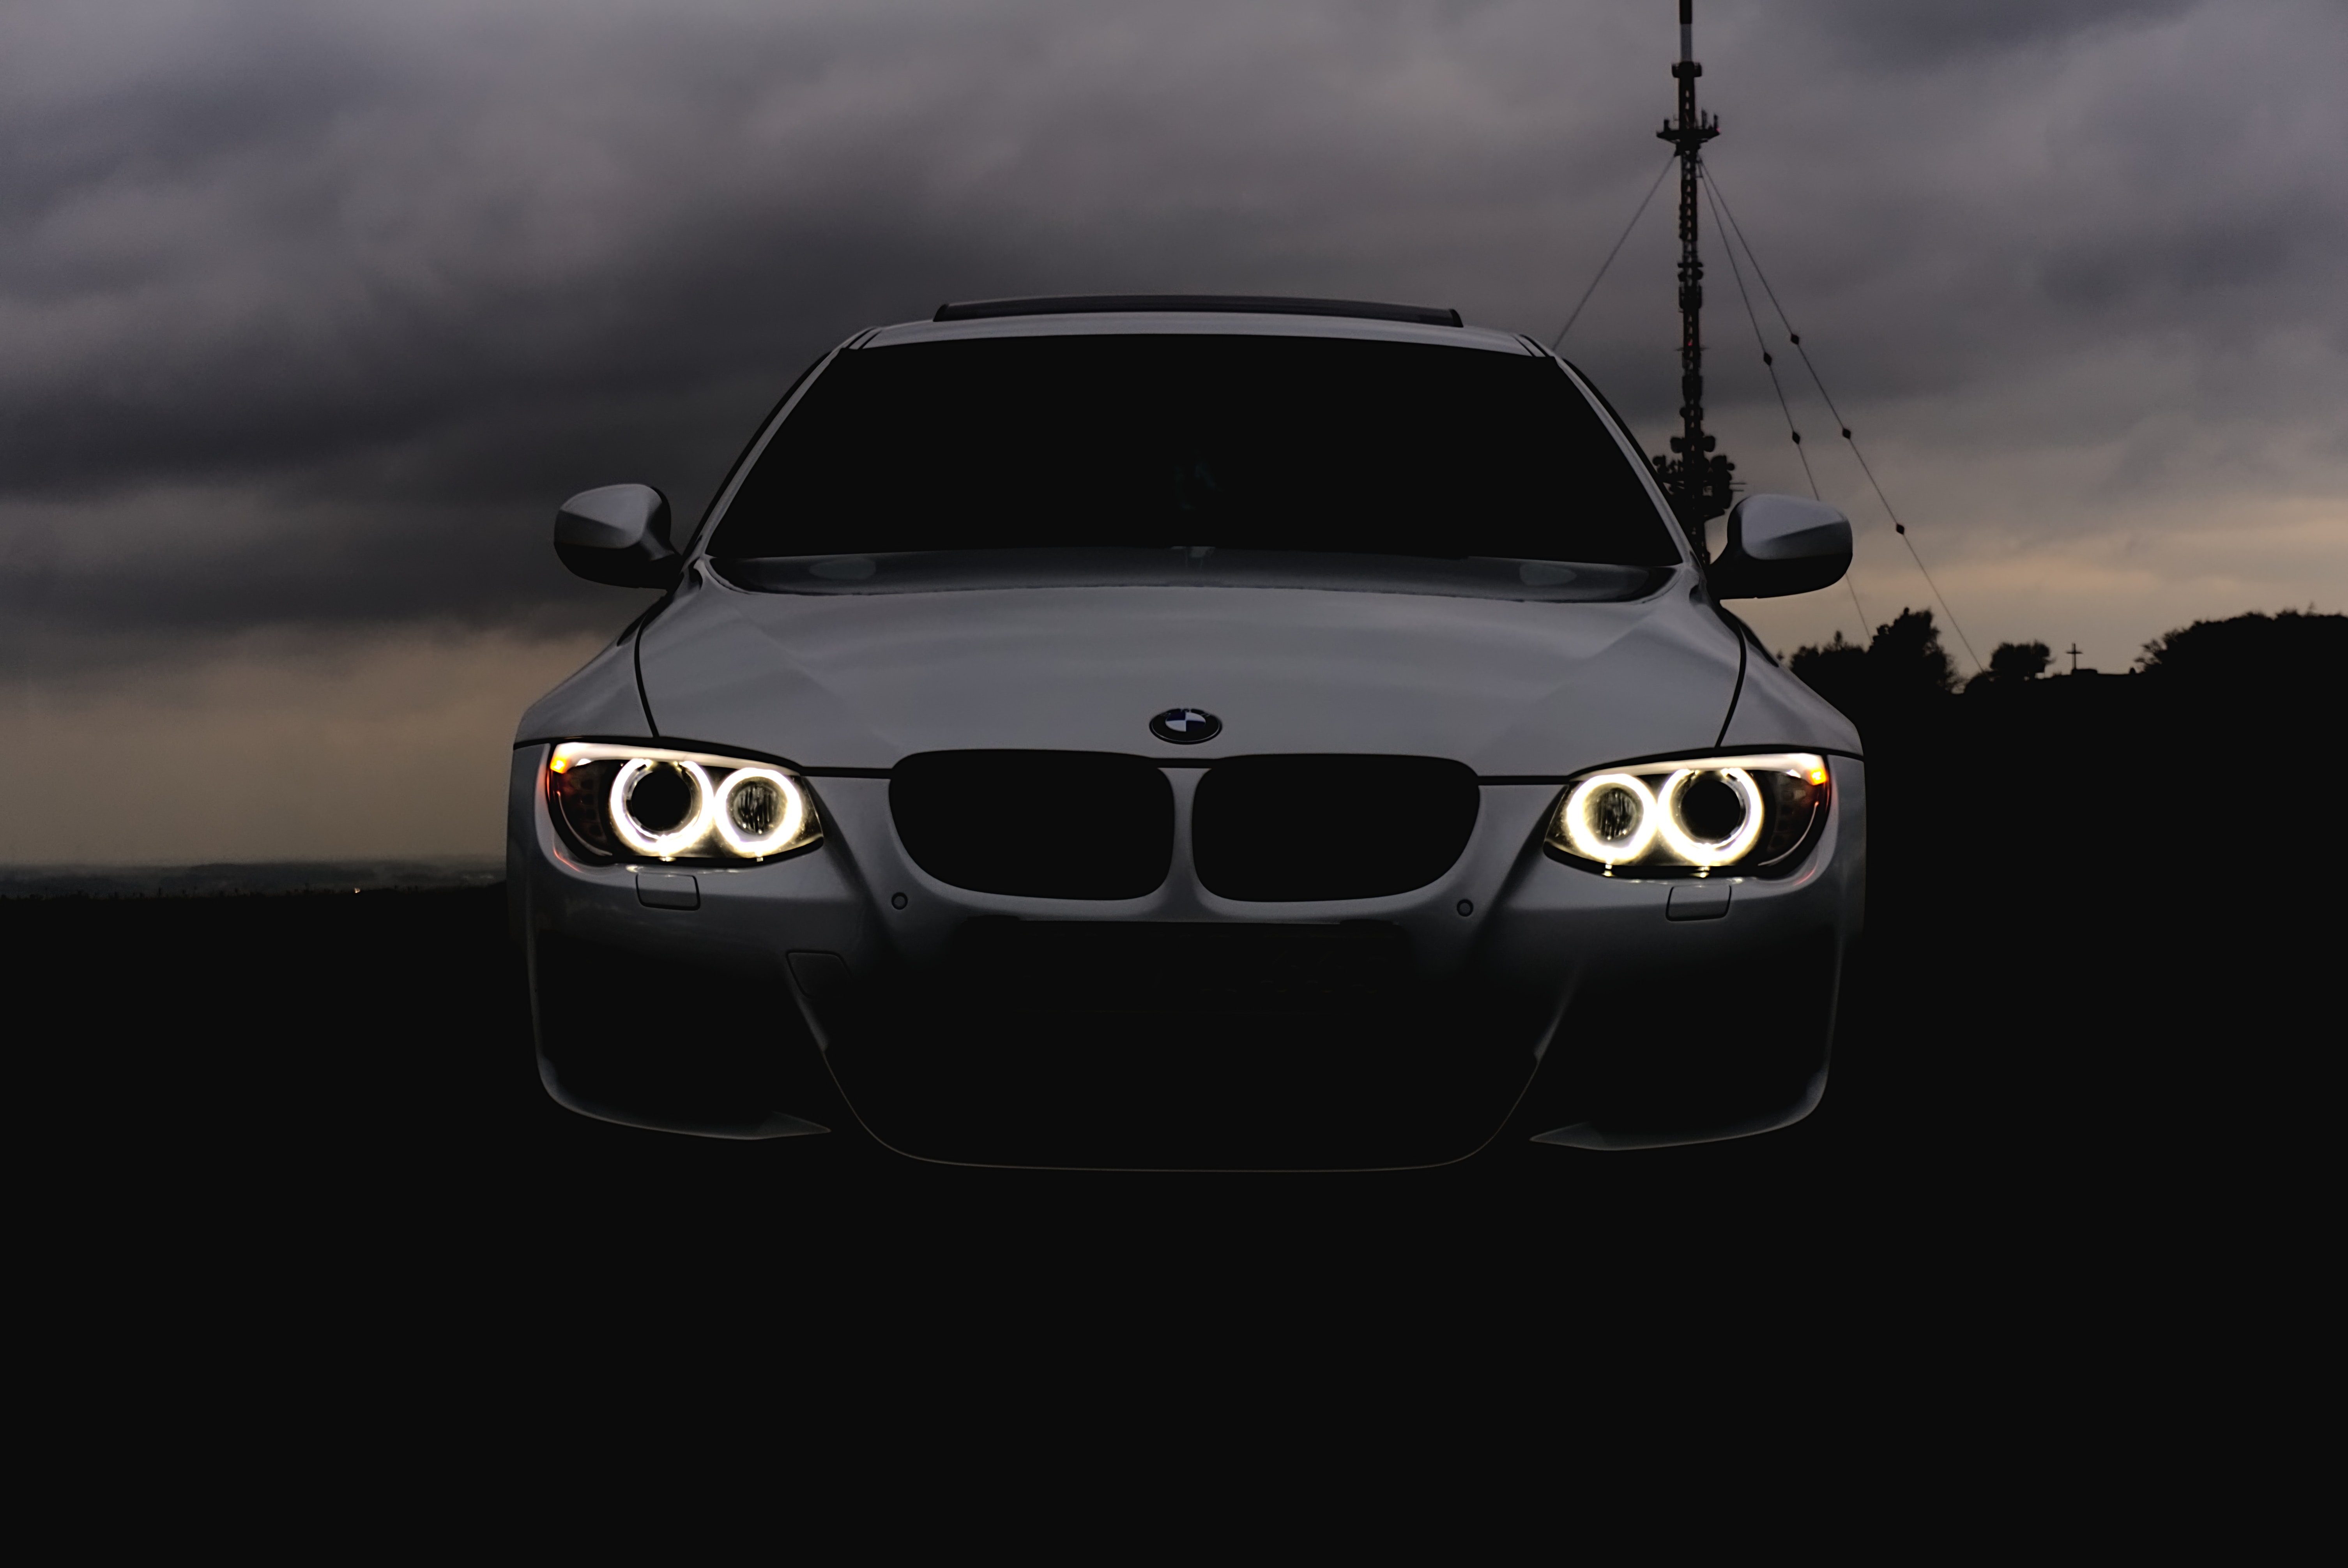 car, bmw, cars, clouds, lights, mainly cloudy, overcast, headlights